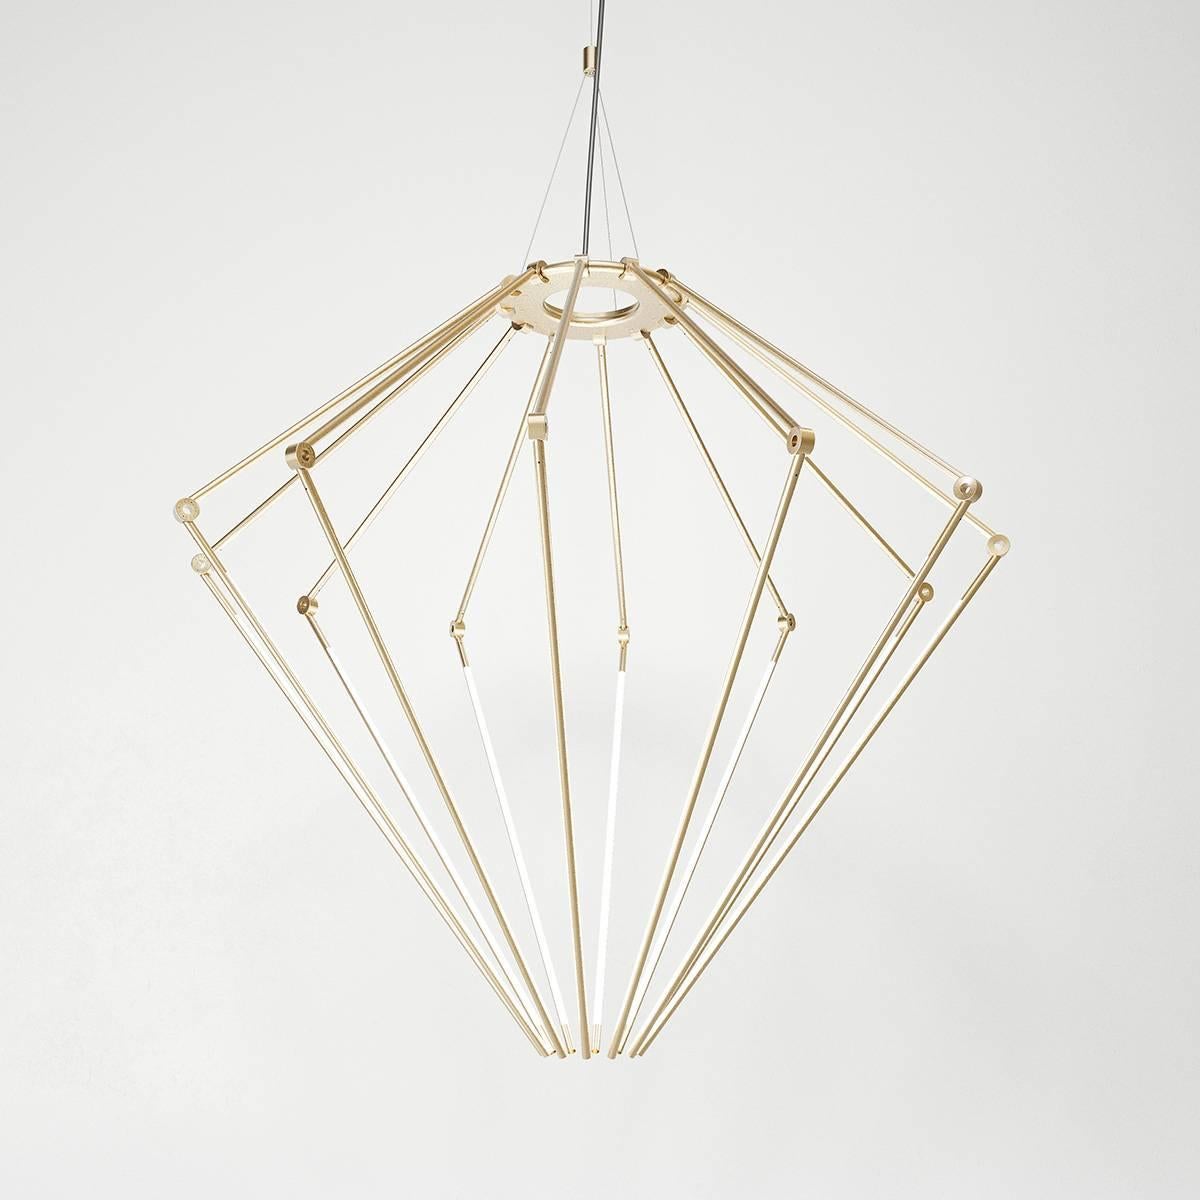 Introducing the latest achievement in lighting design from Brooklyn-based studio, Juniper—the THIN chandelier is an elegant fixture that appears to suspend and illuminate magically, as if there is no wiring or weight.
Juniper collaborated with